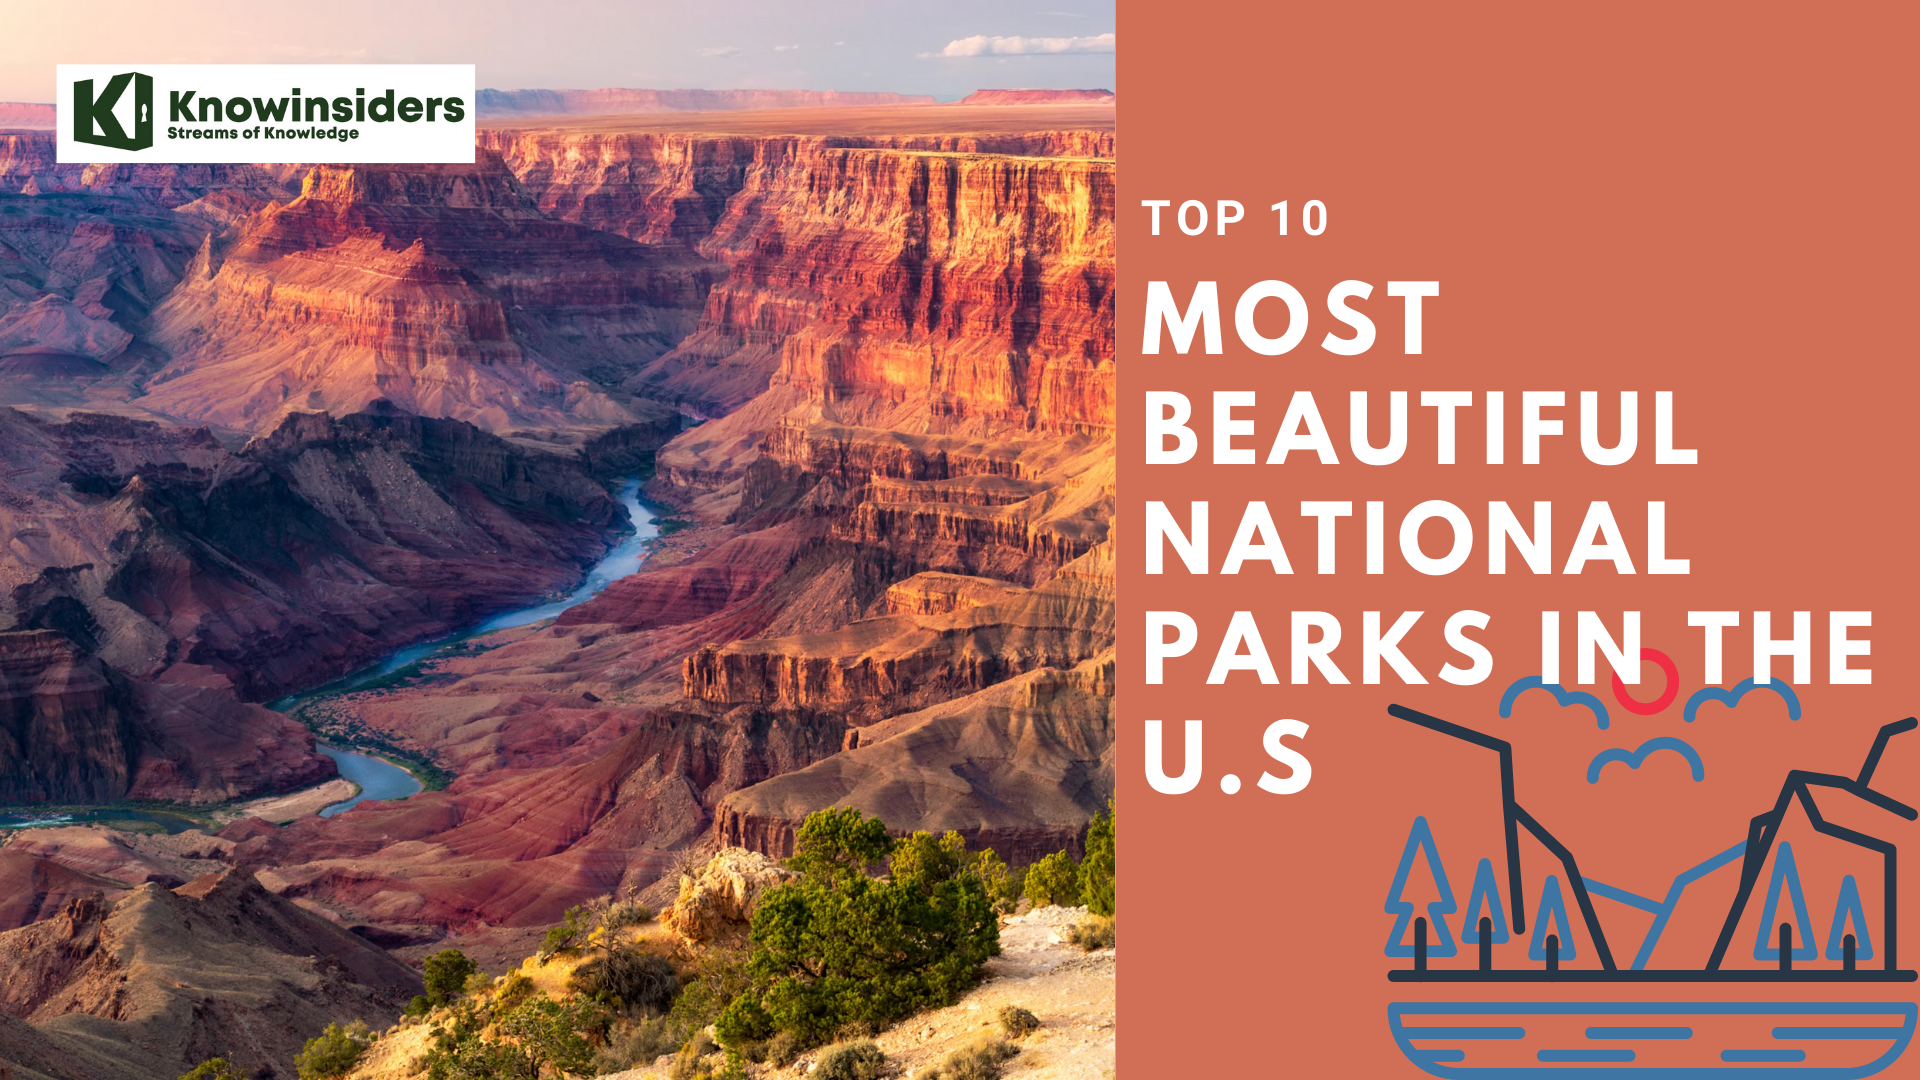 Top 10 Most Beautiful & Popular National Parks in the US